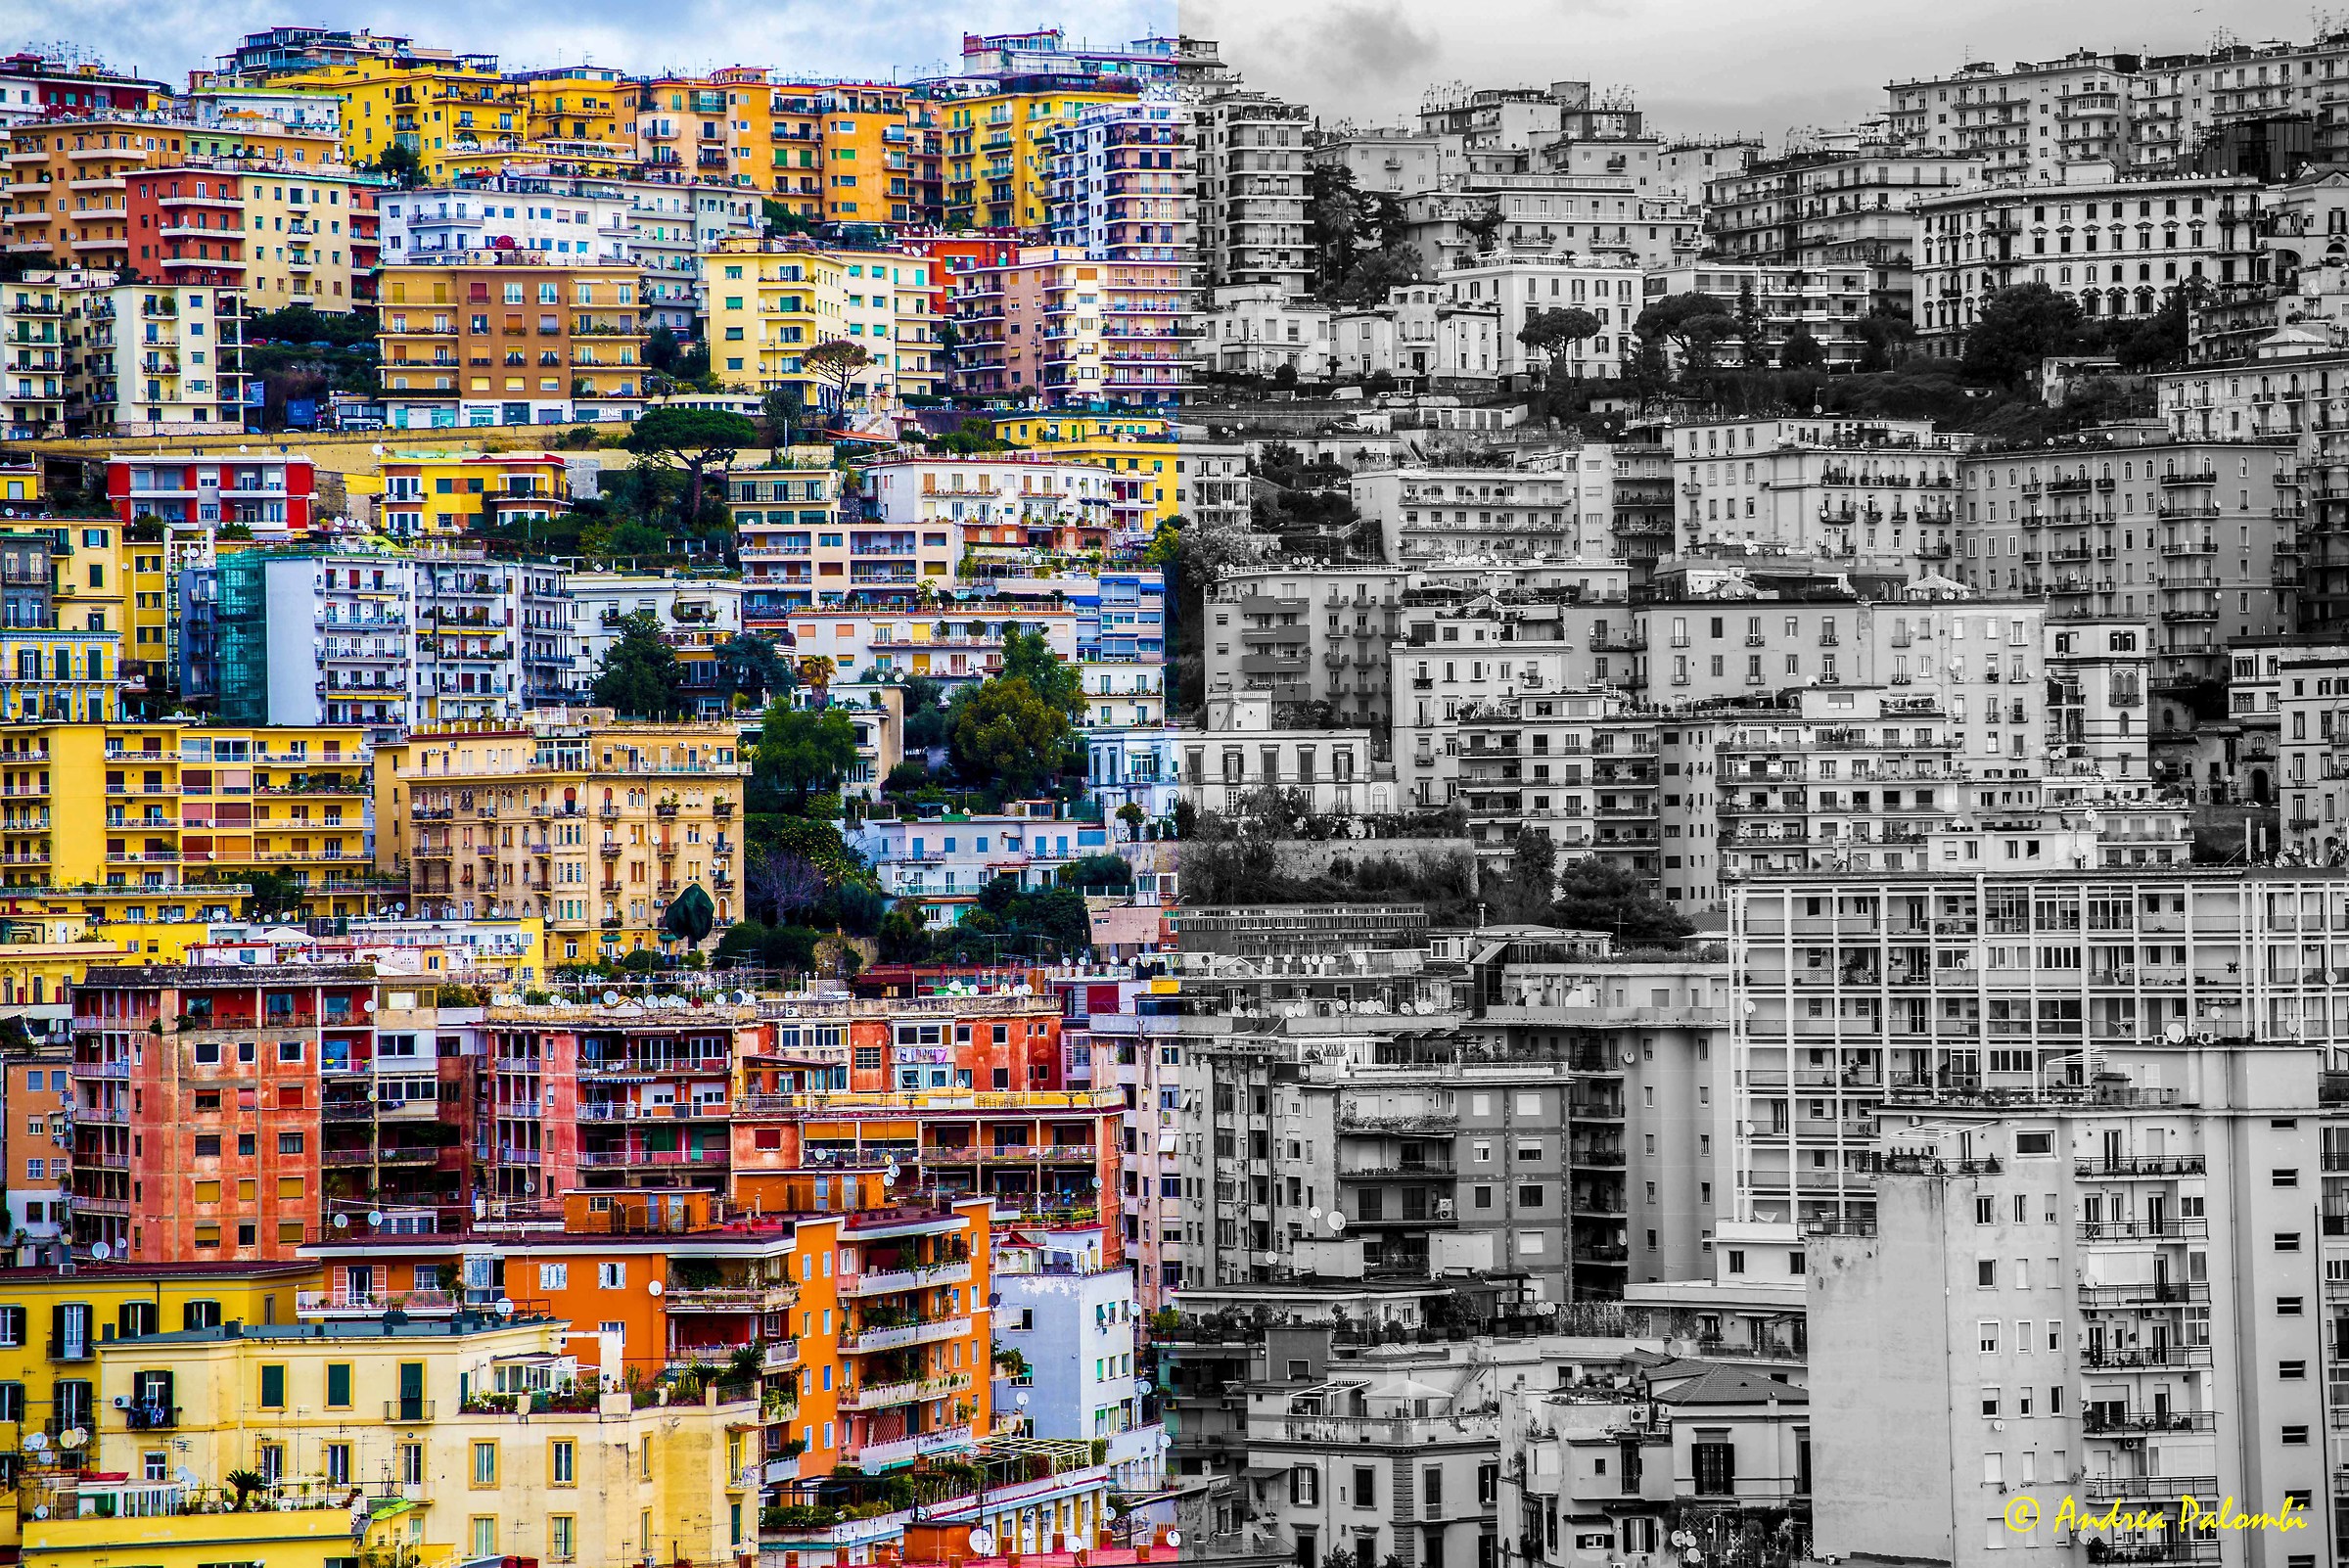 The two faces of Naples...